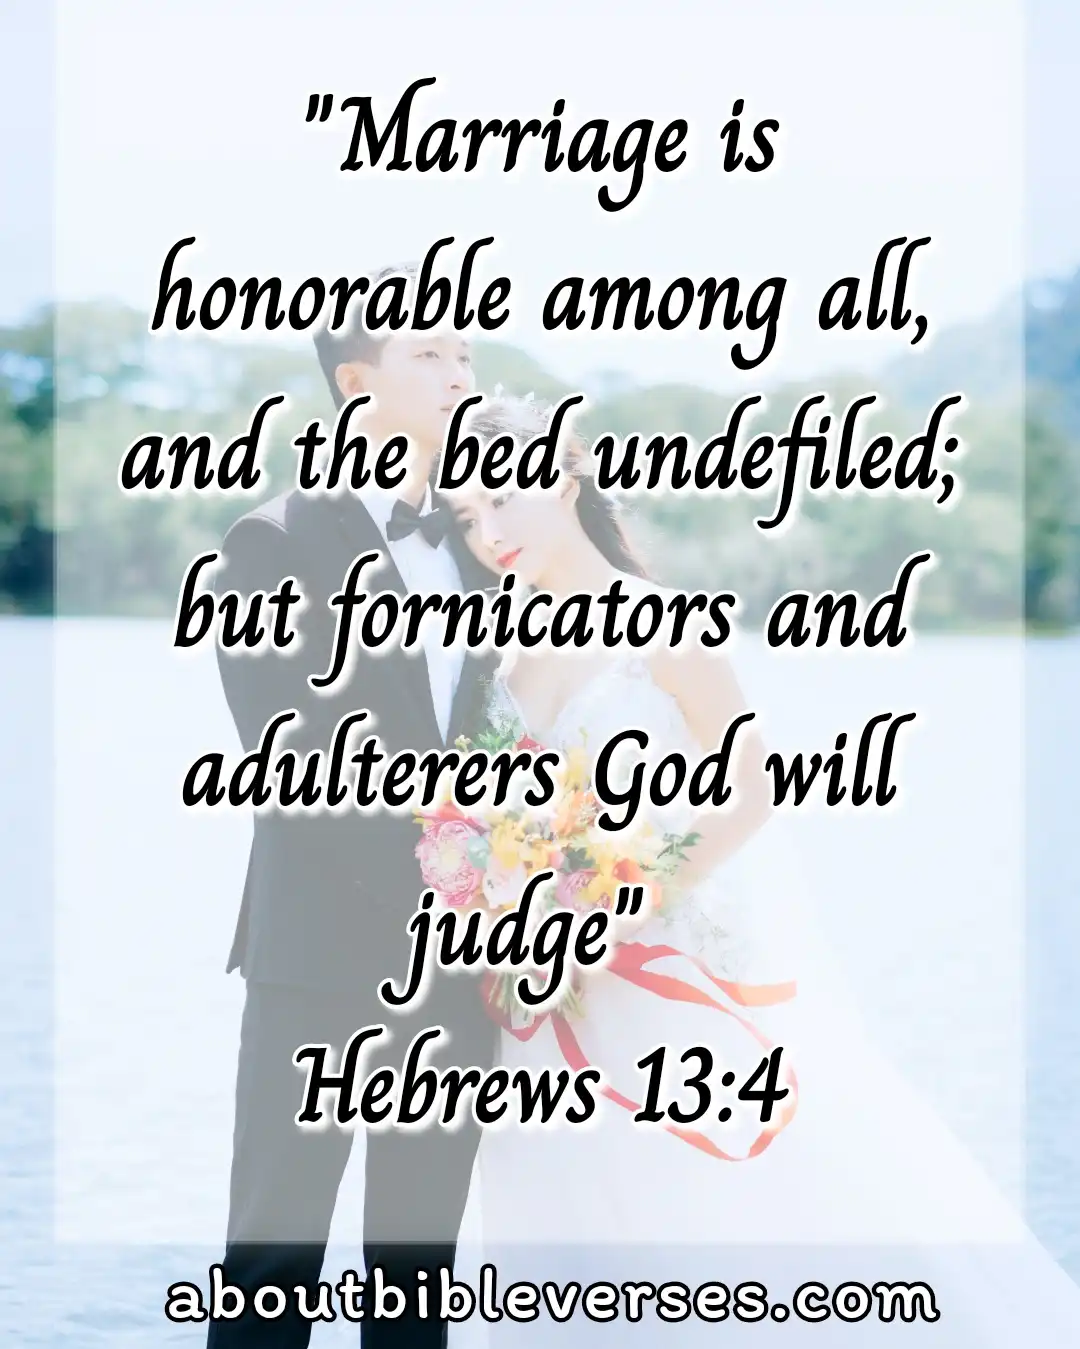 Bible Verses For Blessed Wedding Anniversary (Hebrews 13:4)